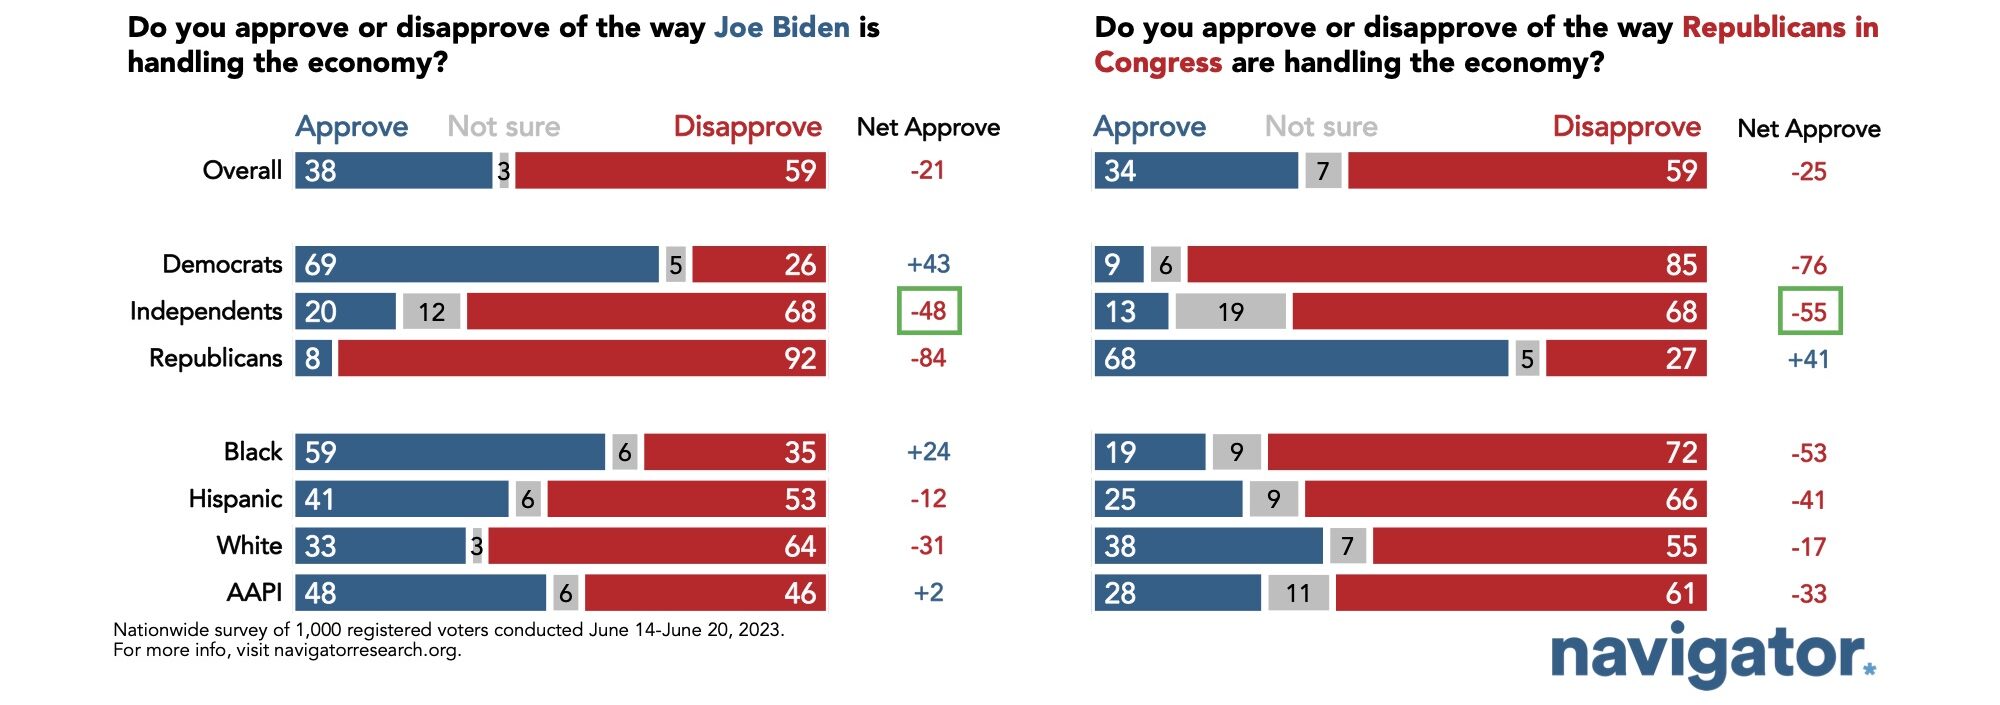 Bar graphs showing survey results to the following questions: Do you approve or disapprove of the way Joe Biden is handling the economy? Do you approve or disapprove of the way Republicans in Congress are handling the economy?